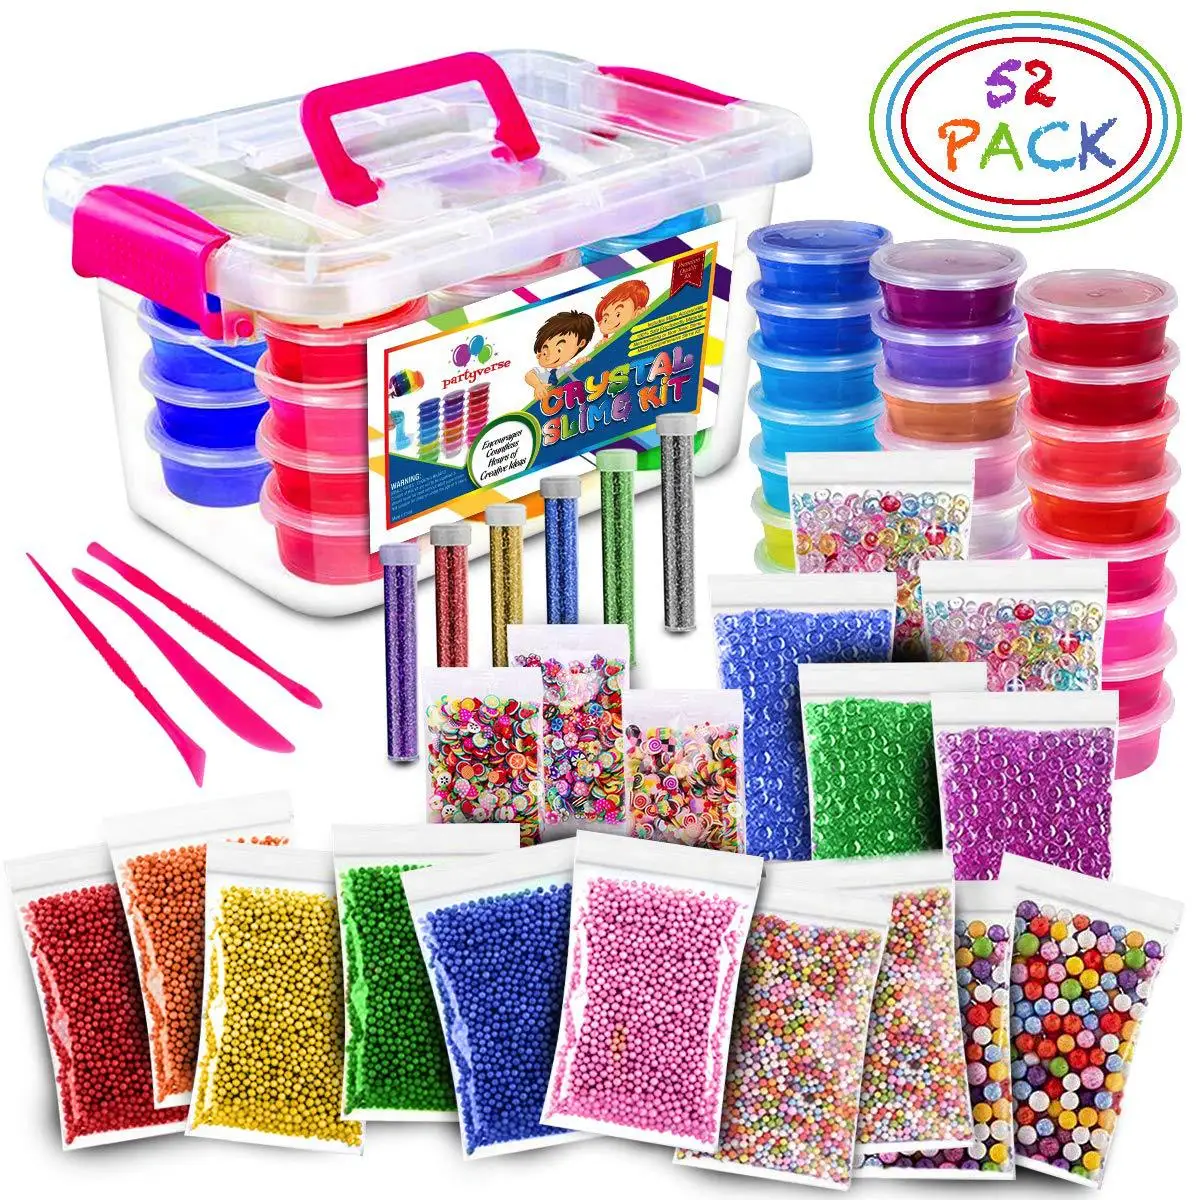 52Pack/Lot Fluffy Slime Kit 24 Color Slime Supplies Gifts for kids DIY Kit Sensory Play Stress Relief Toy Stretchy Soft for Kids